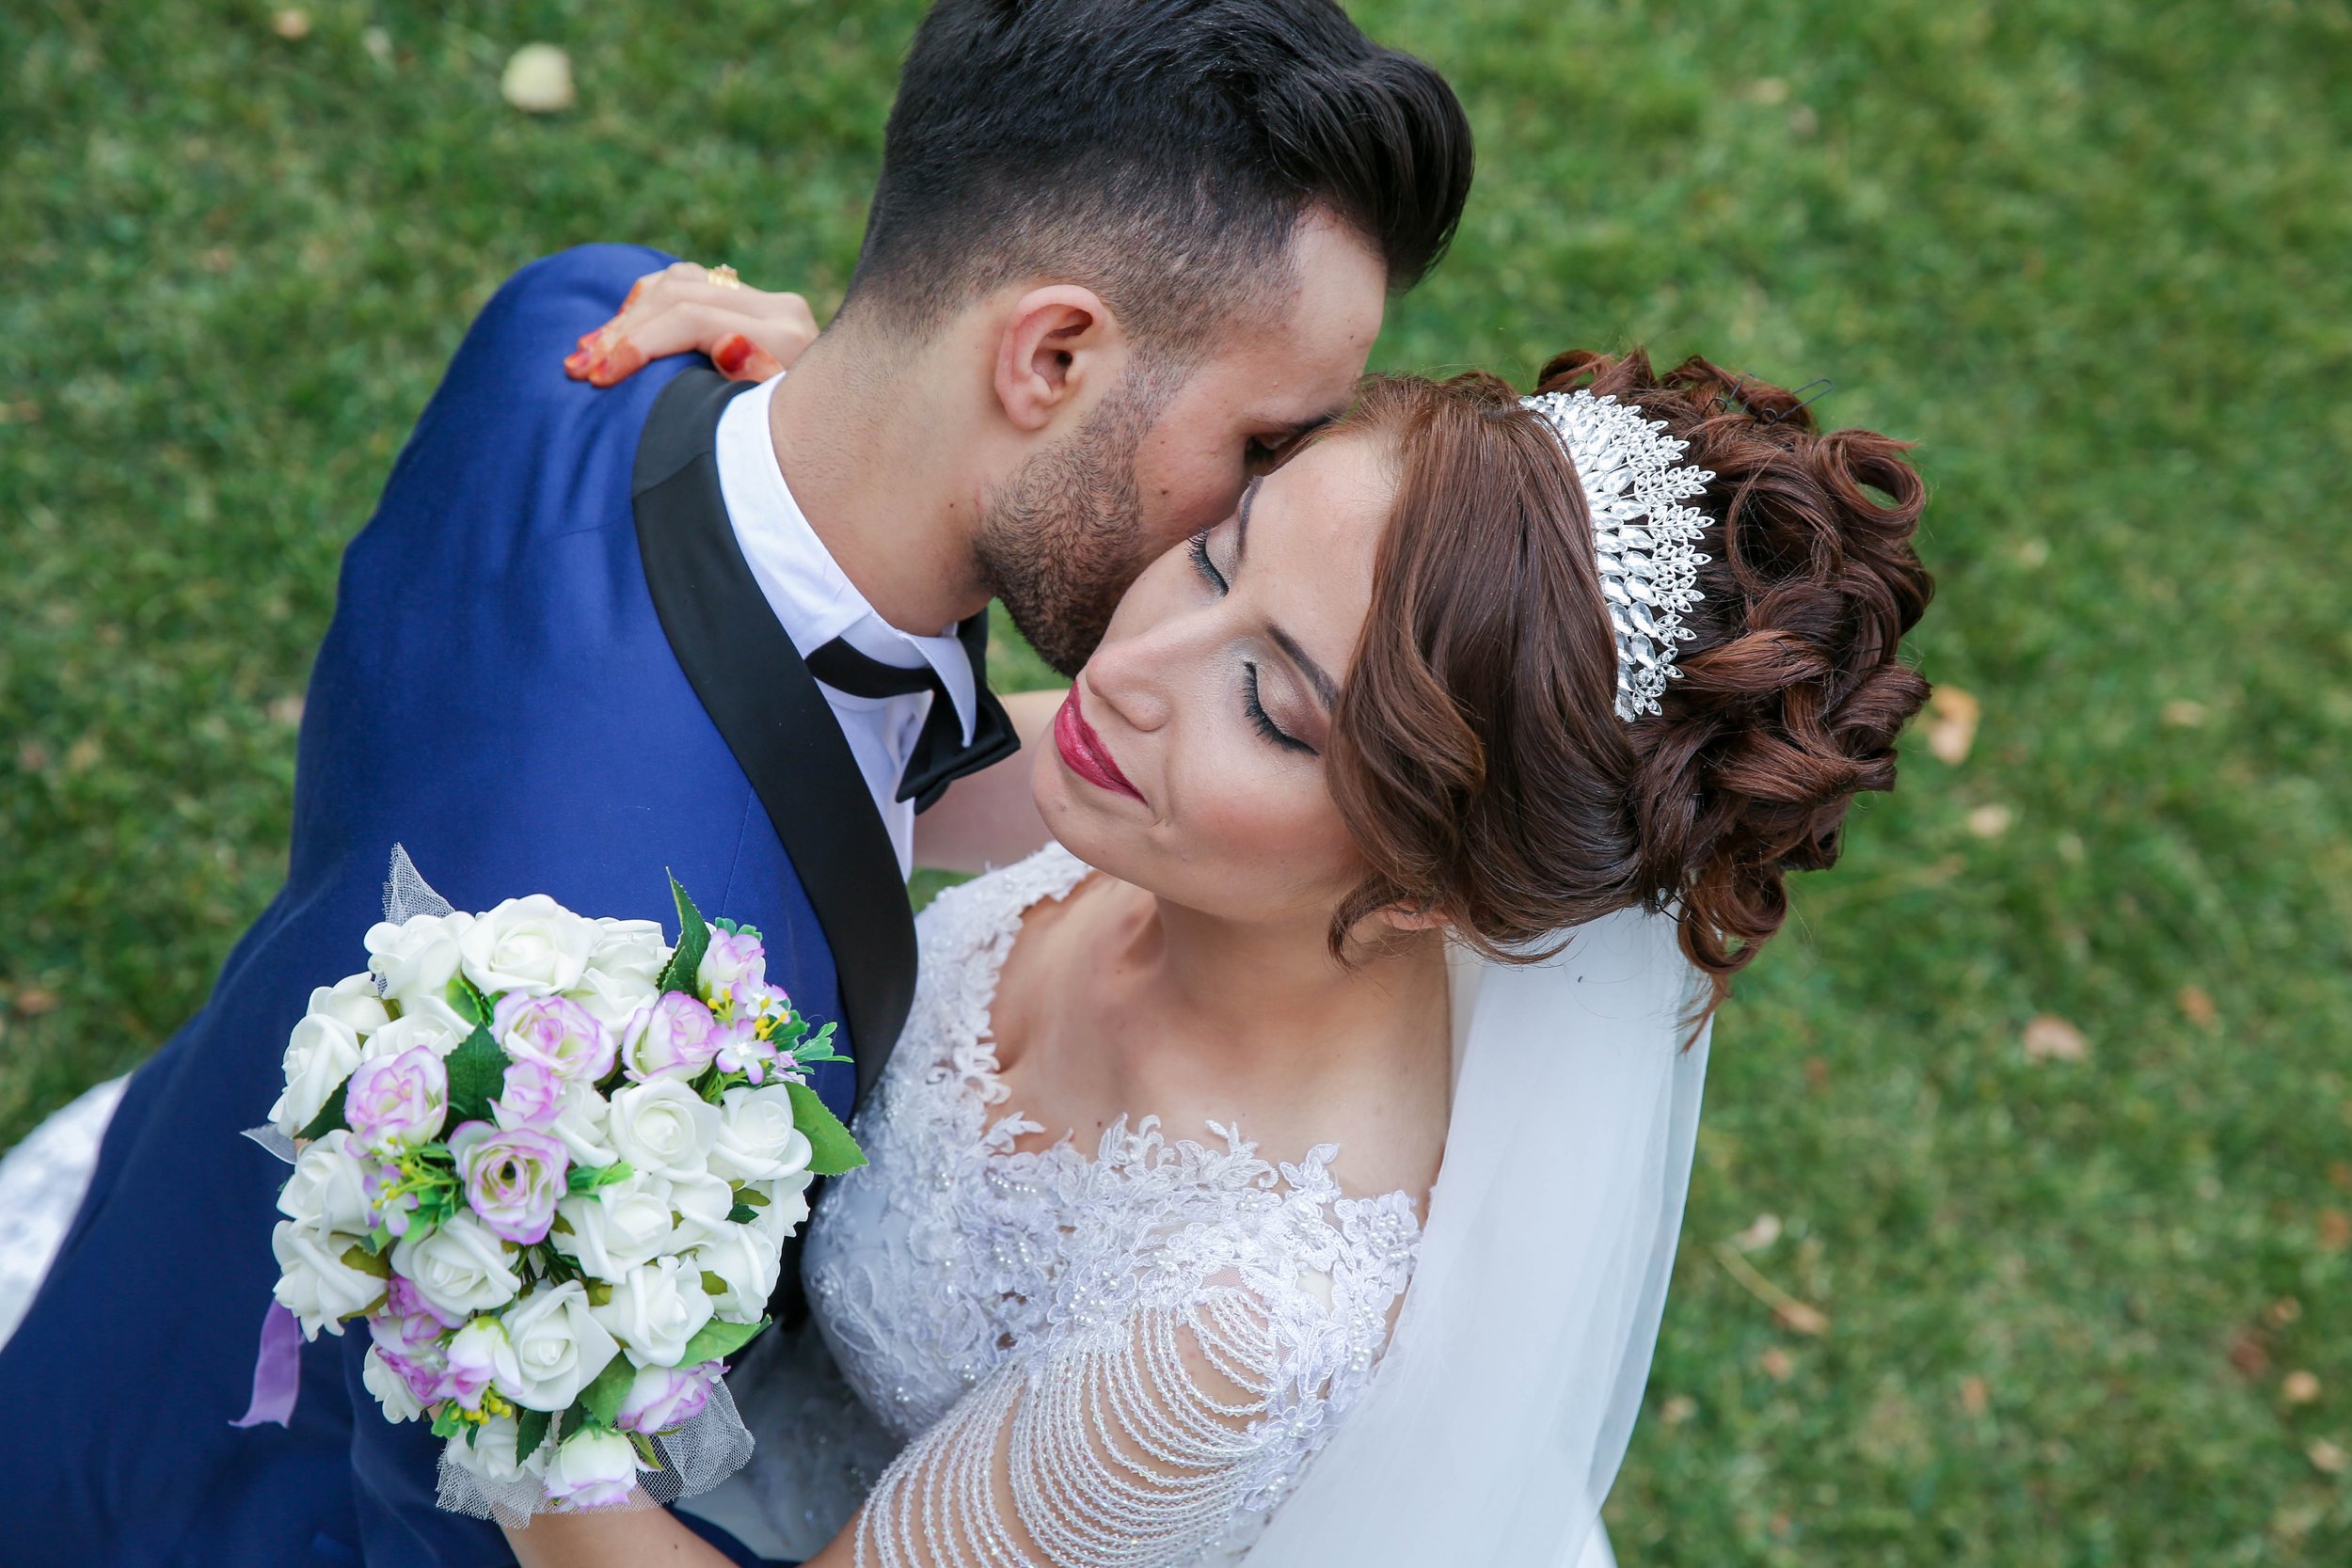 Latino wedding couple groom in blue suit and bride in white dress with boquet of white flowers kissing one another.jpg